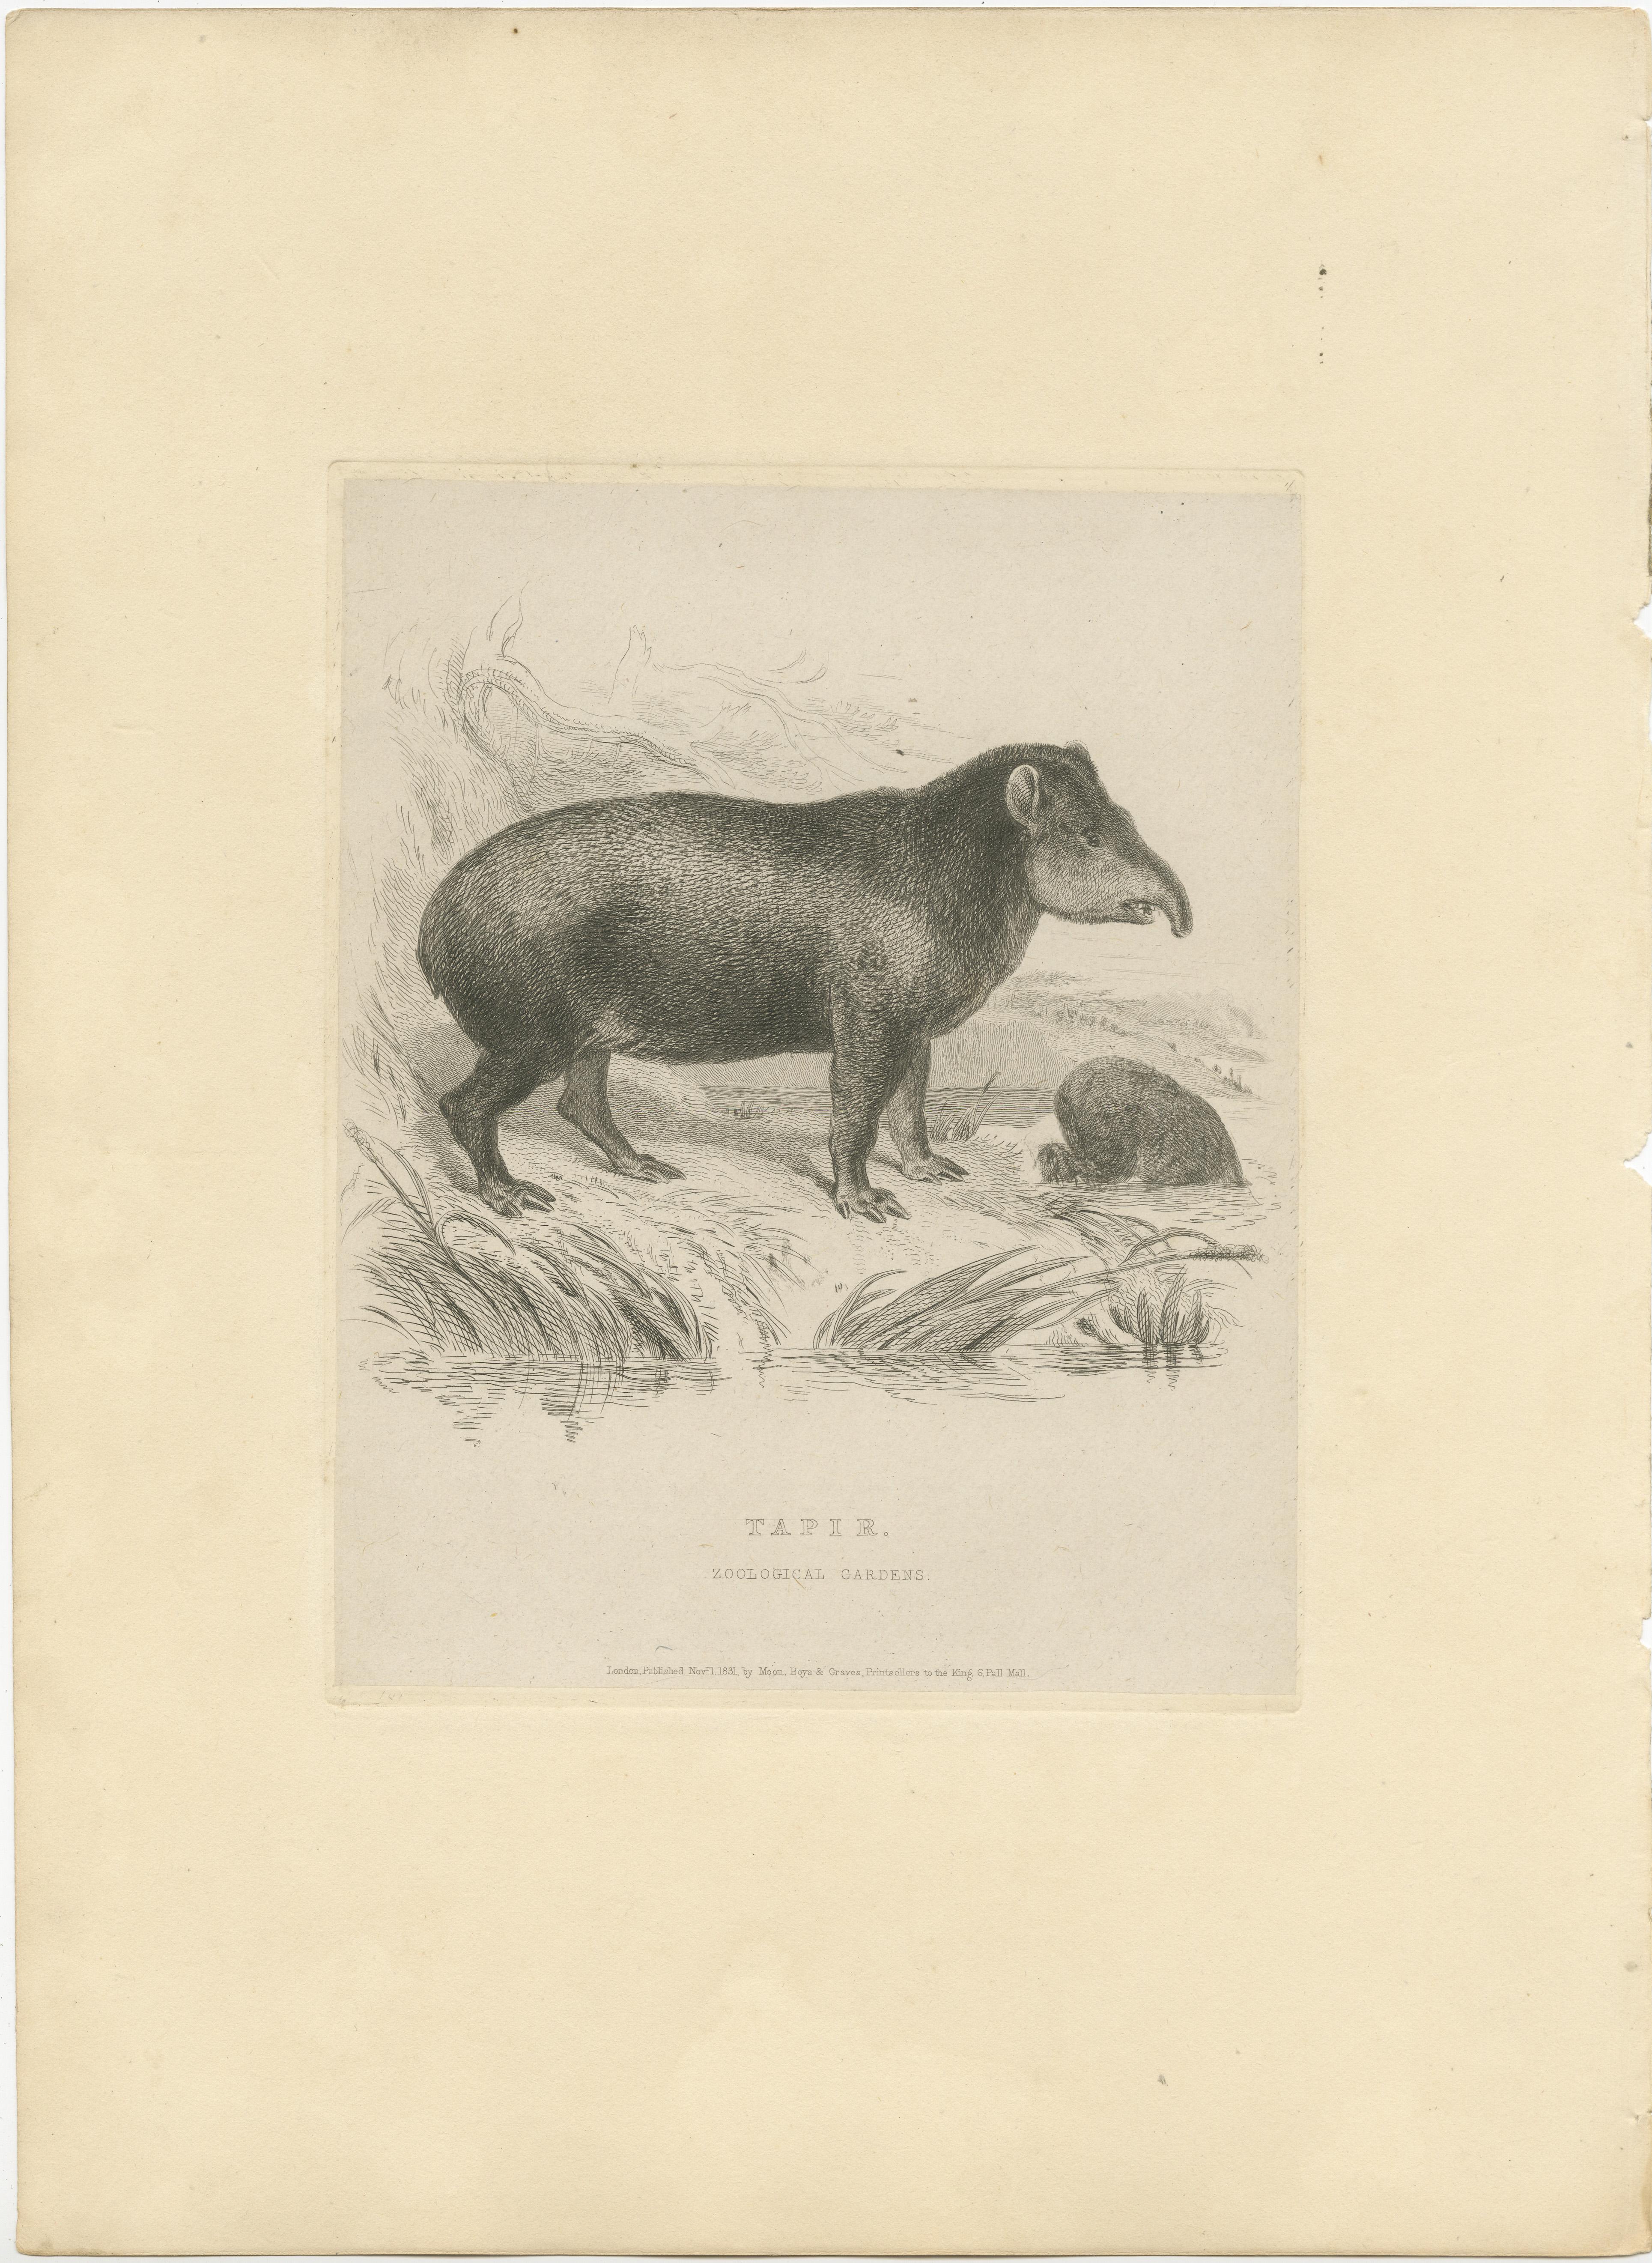 Antique print titled 'Tapir'. Original old print of a tapir. This print originates from the series 'Characteristic sketches of animals, principally from the Zoological Gardens, Regent's Park' published circa 1832 by John Henry Barrow and Thomas